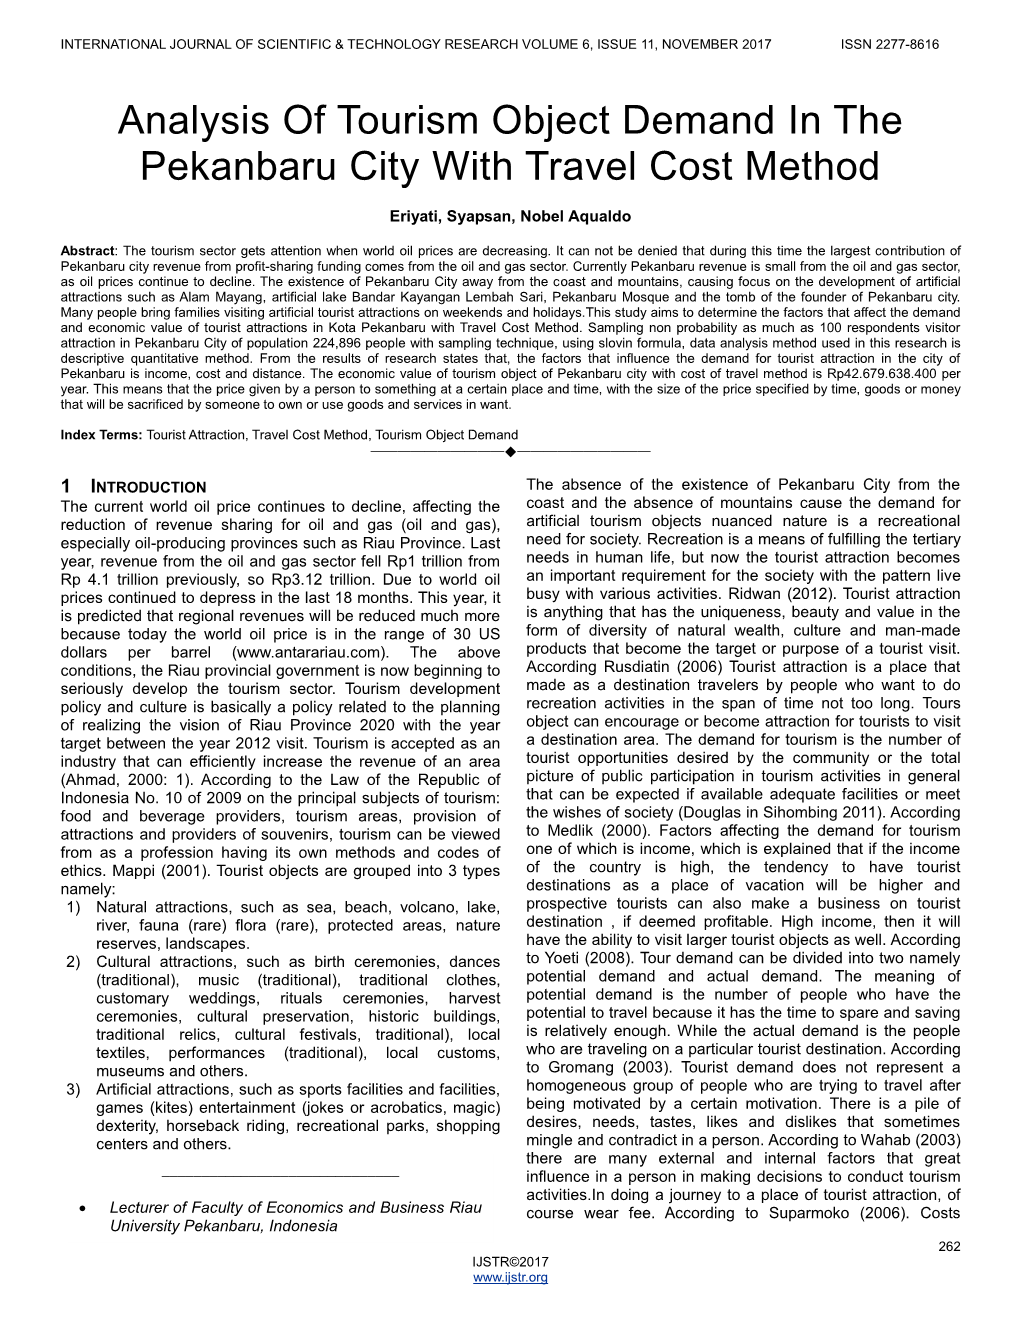 Analysis of Tourism Object Demand in the Pekanbaru City with Travel Cost Method